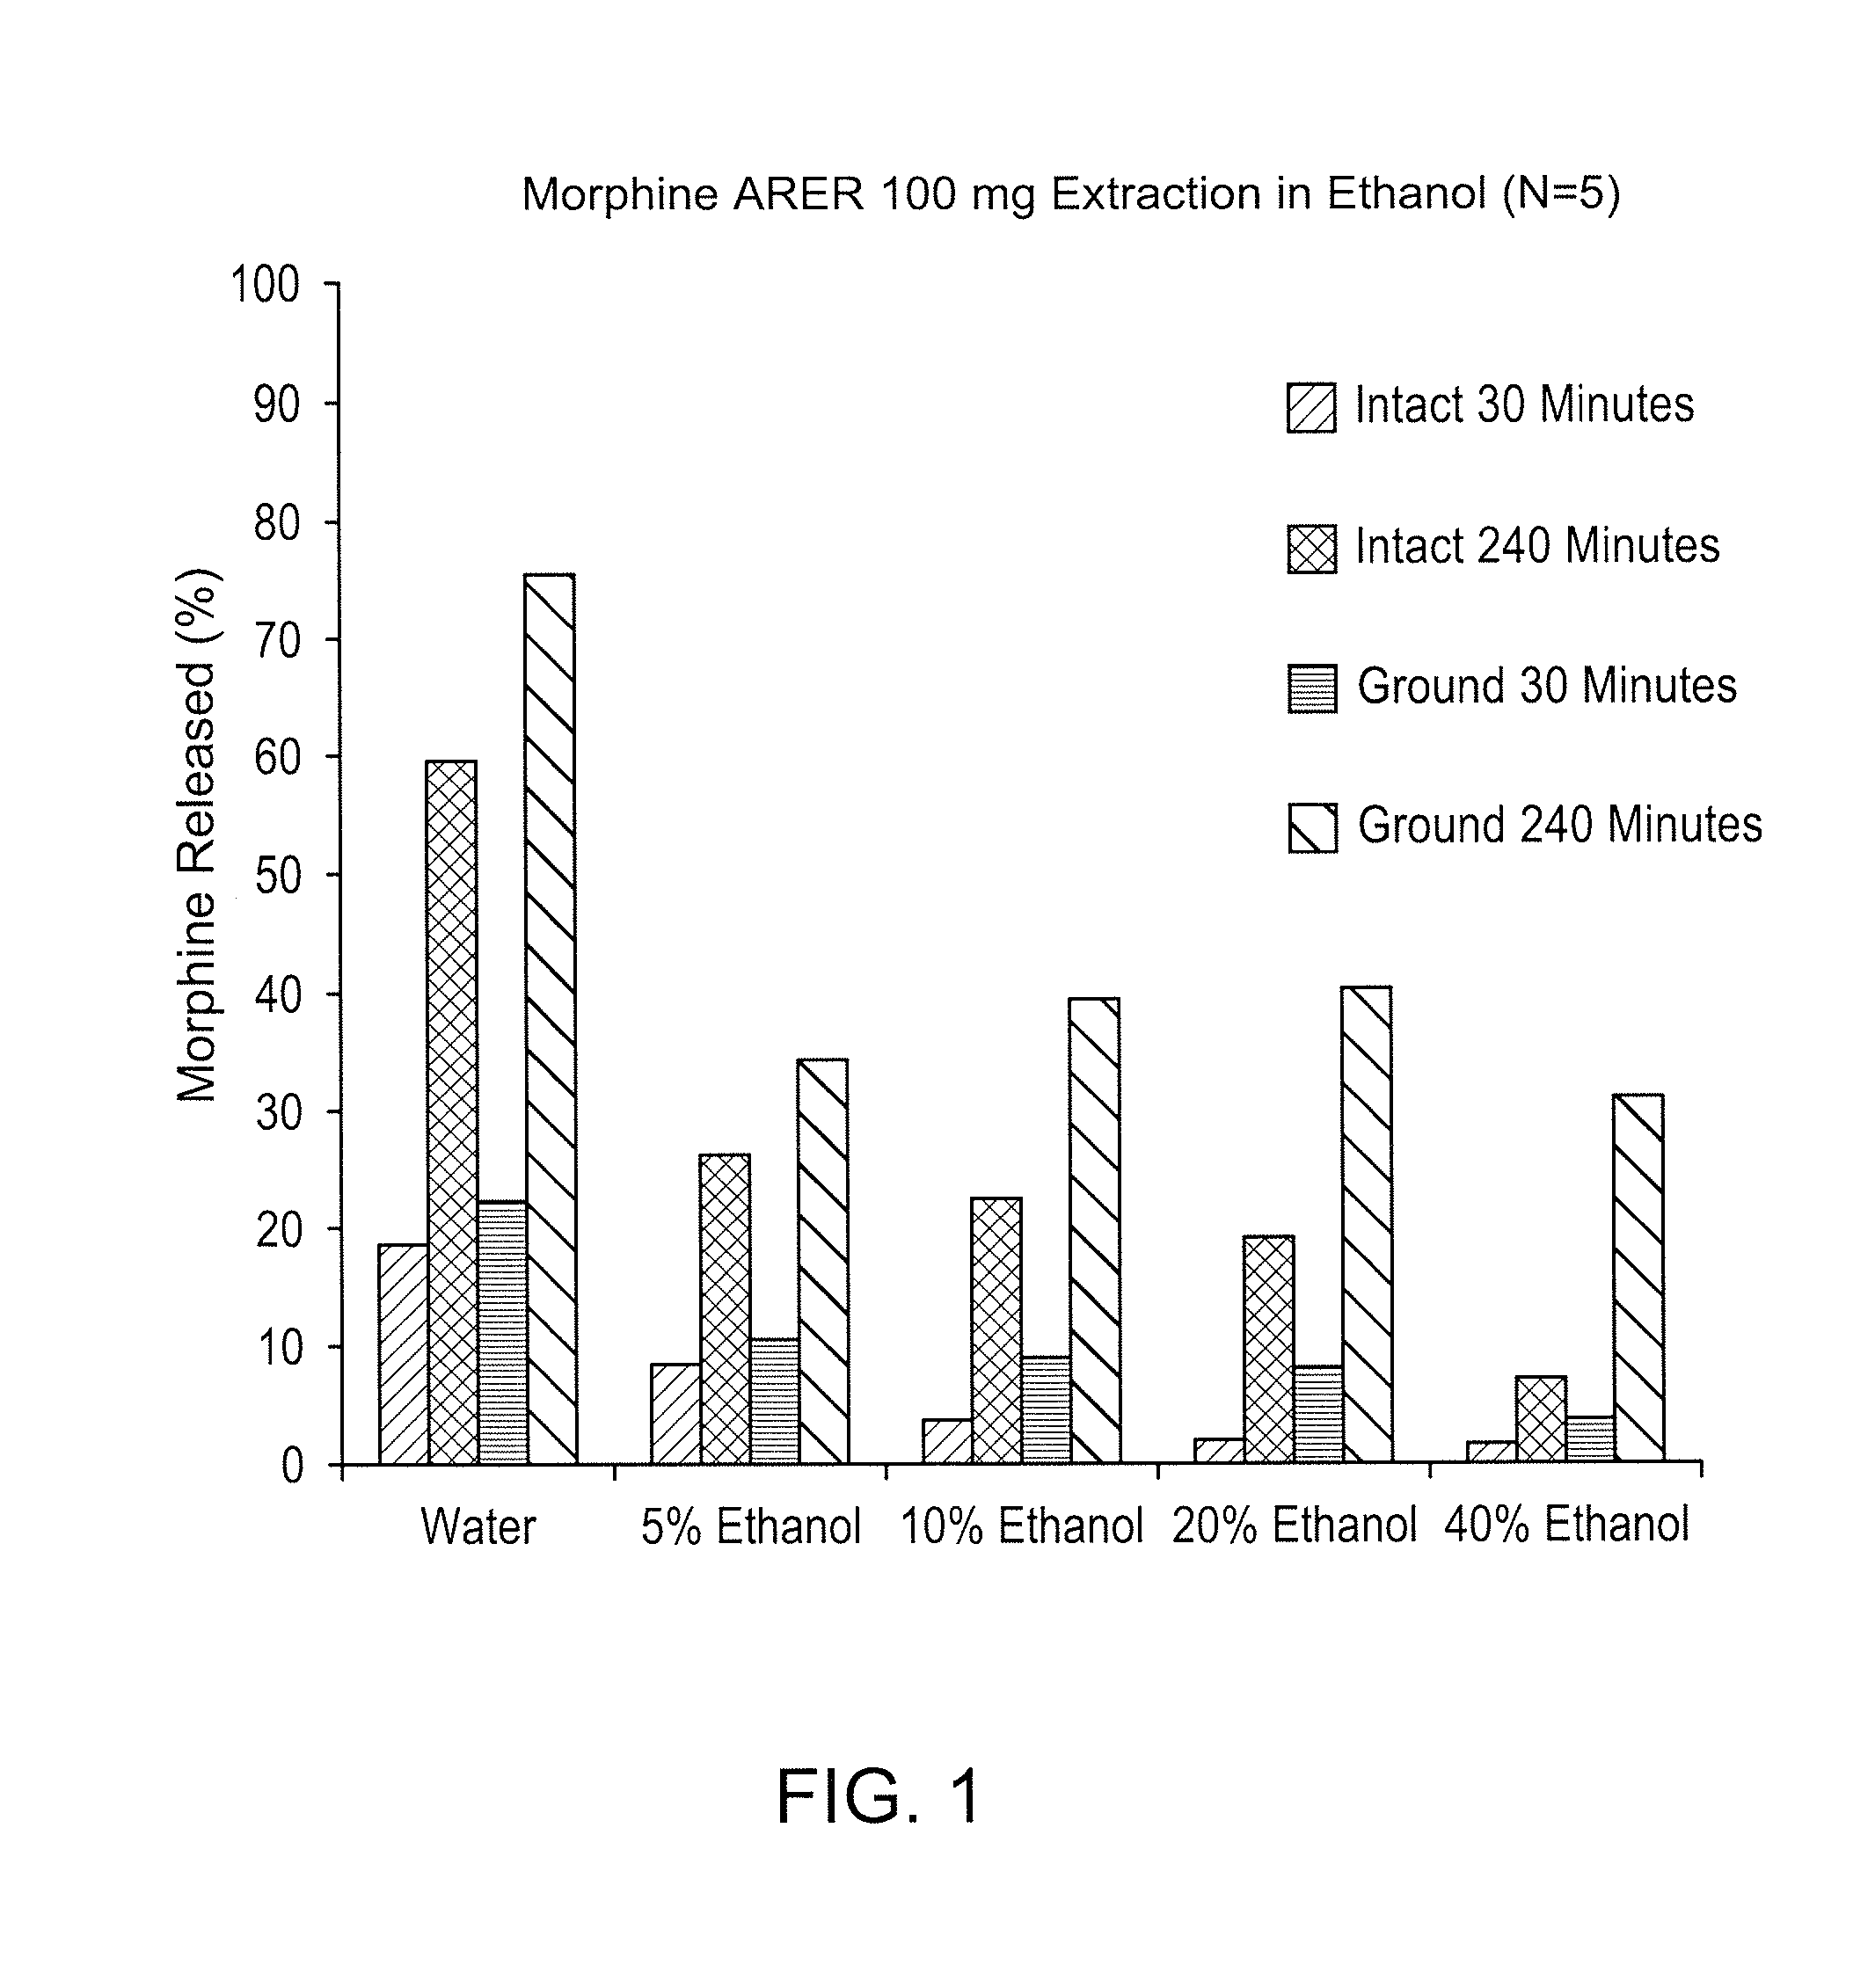 Abuse deterrent compositions and methods of use